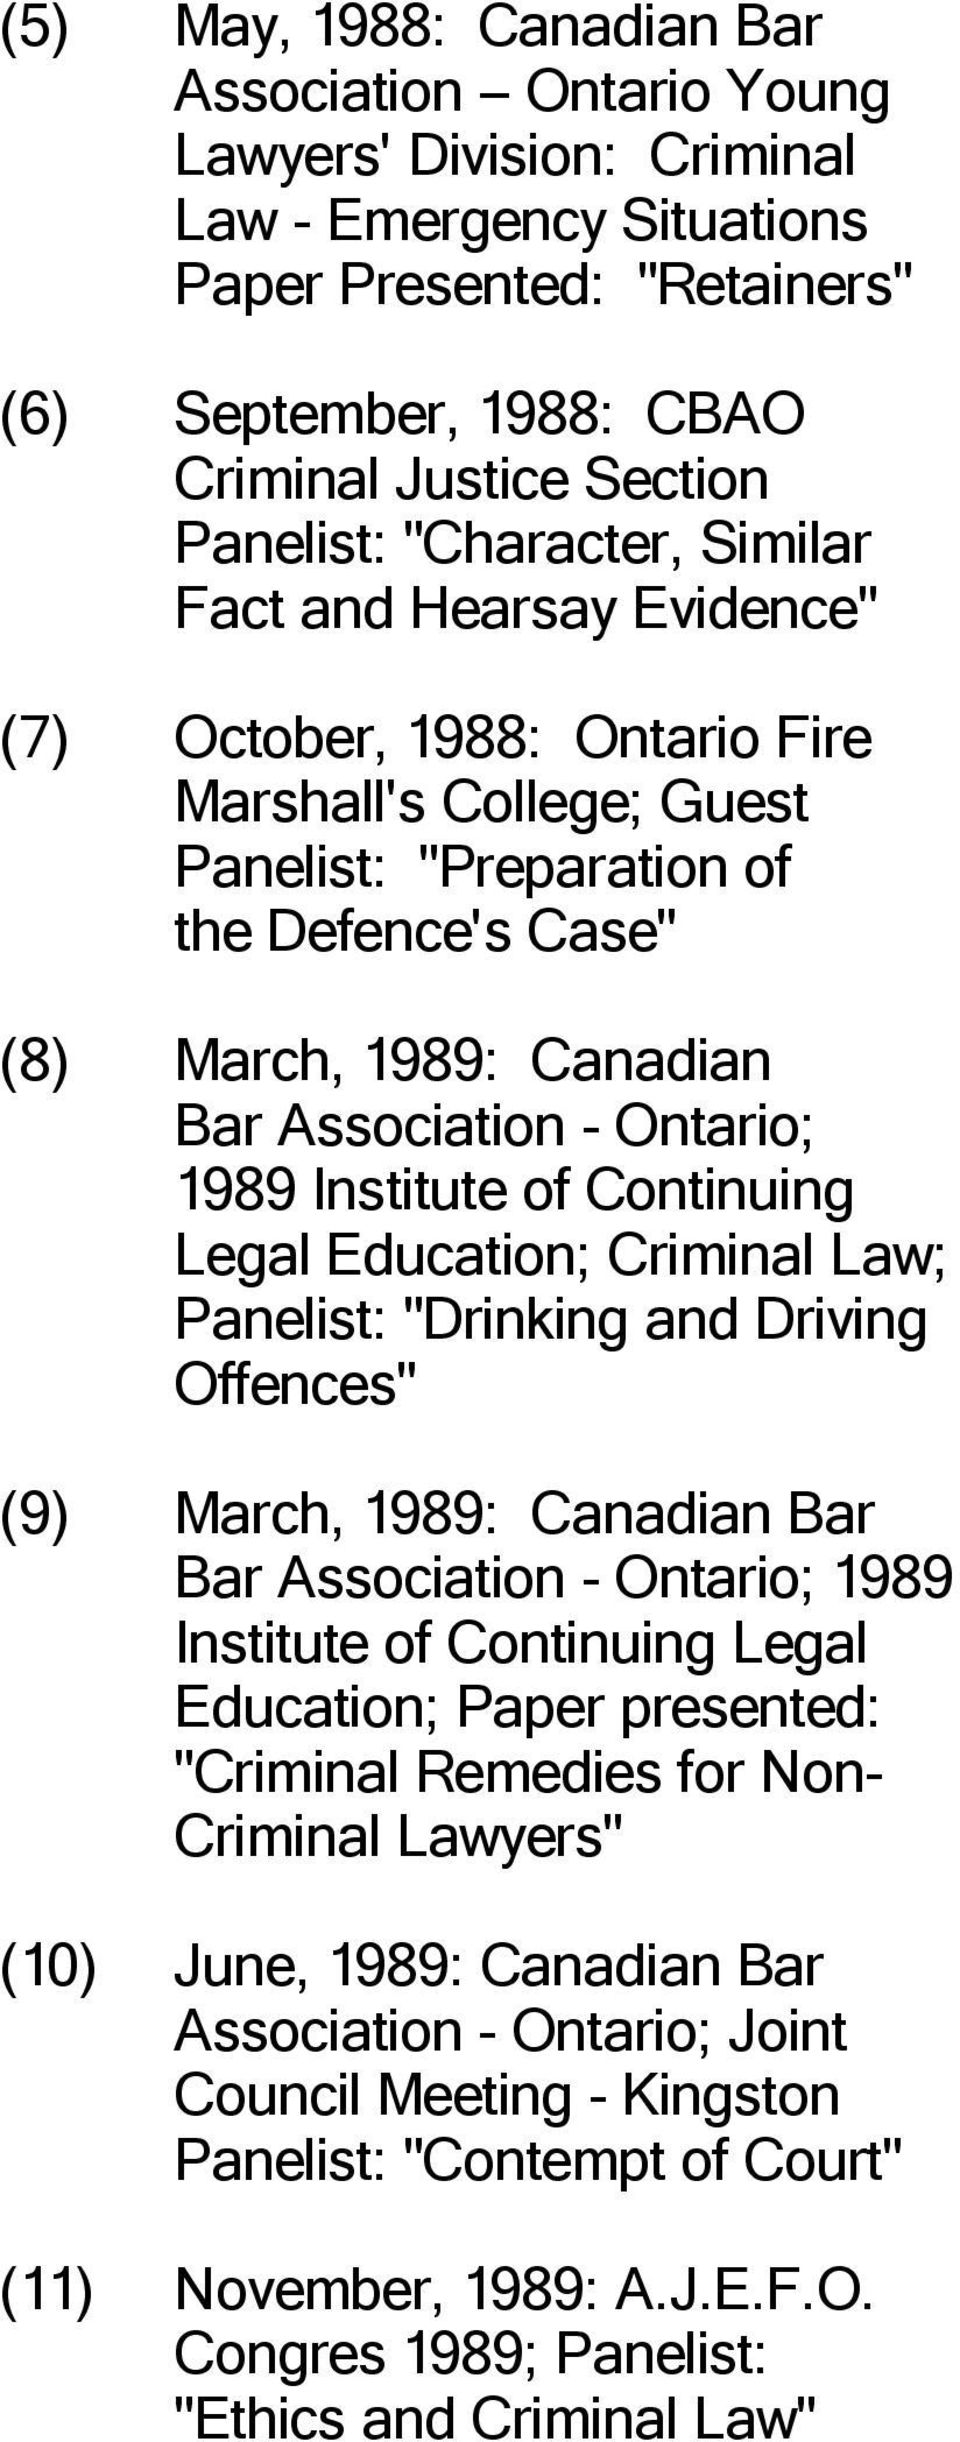 Association - Ontario; 1989 Institute of Continuing Legal Education; Criminal Law; Panelist: "Drinking and Driving Offences" (9) March, 1989: Canadian Bar Bar Association - Ontario; 1989 Institute of